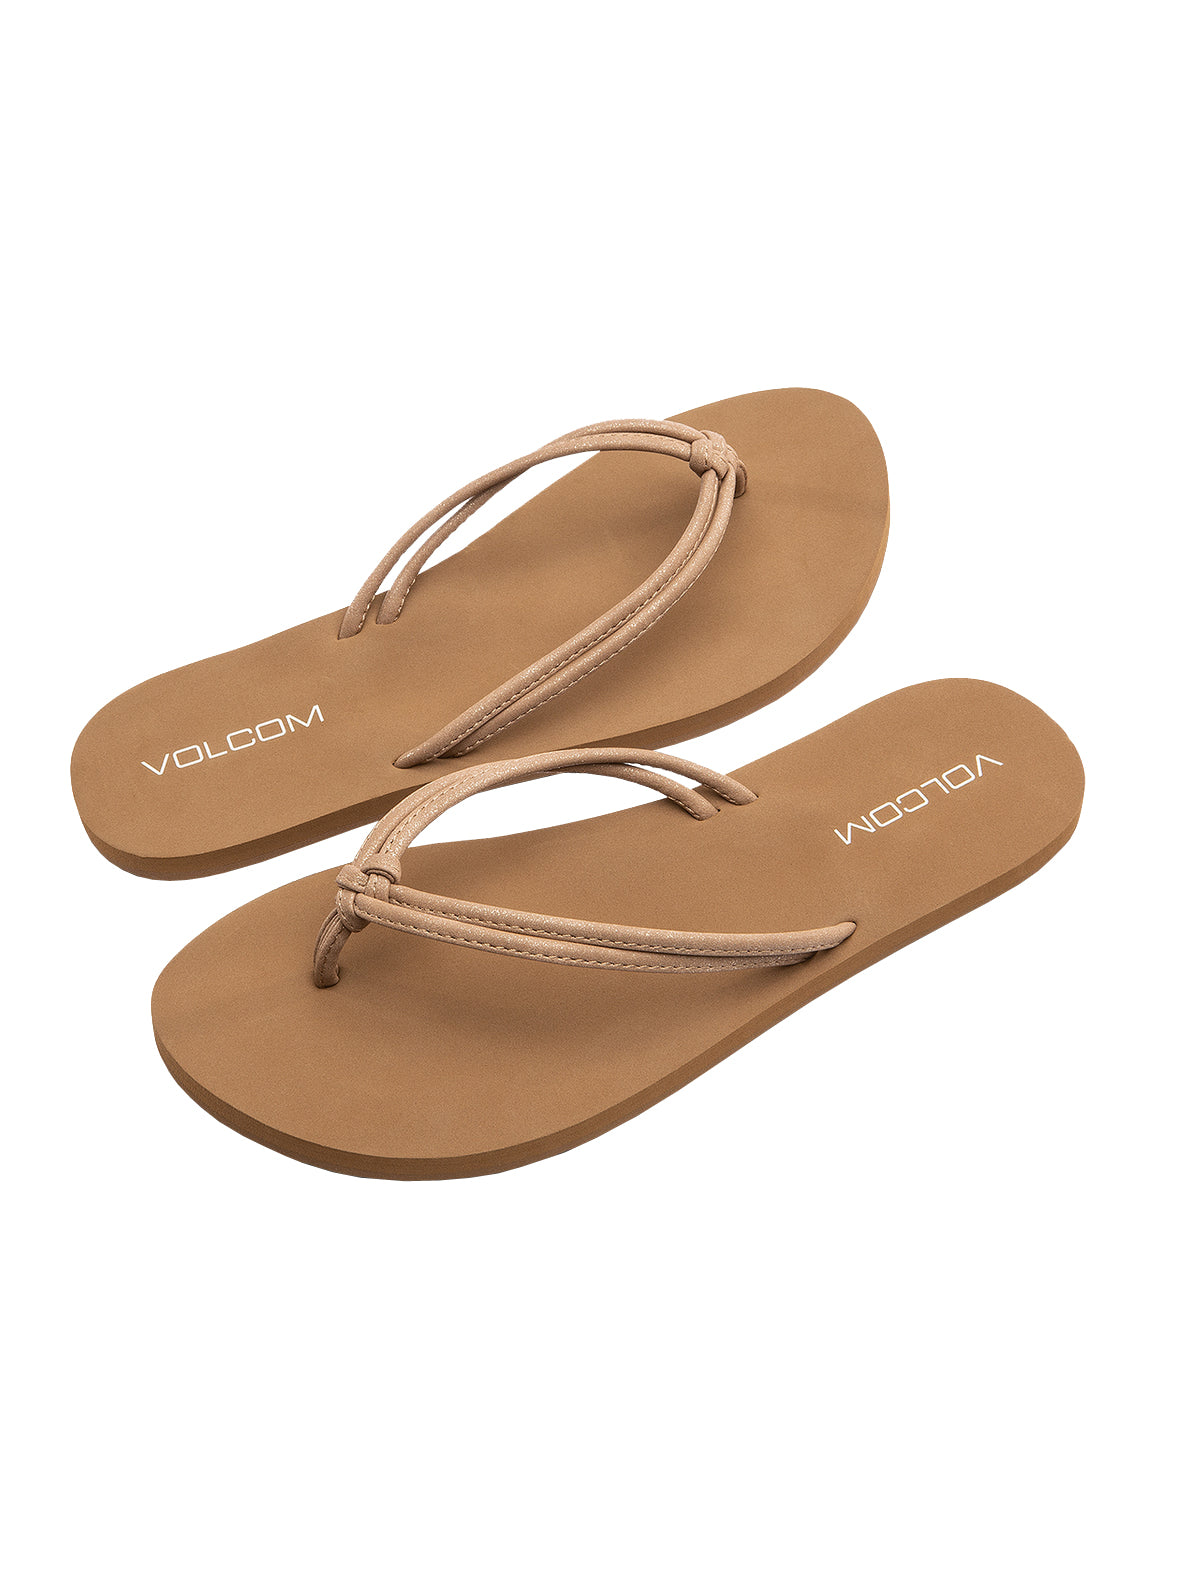 Volcom Forever and Ever 2 Womens Sandal TAN23-Tan 9